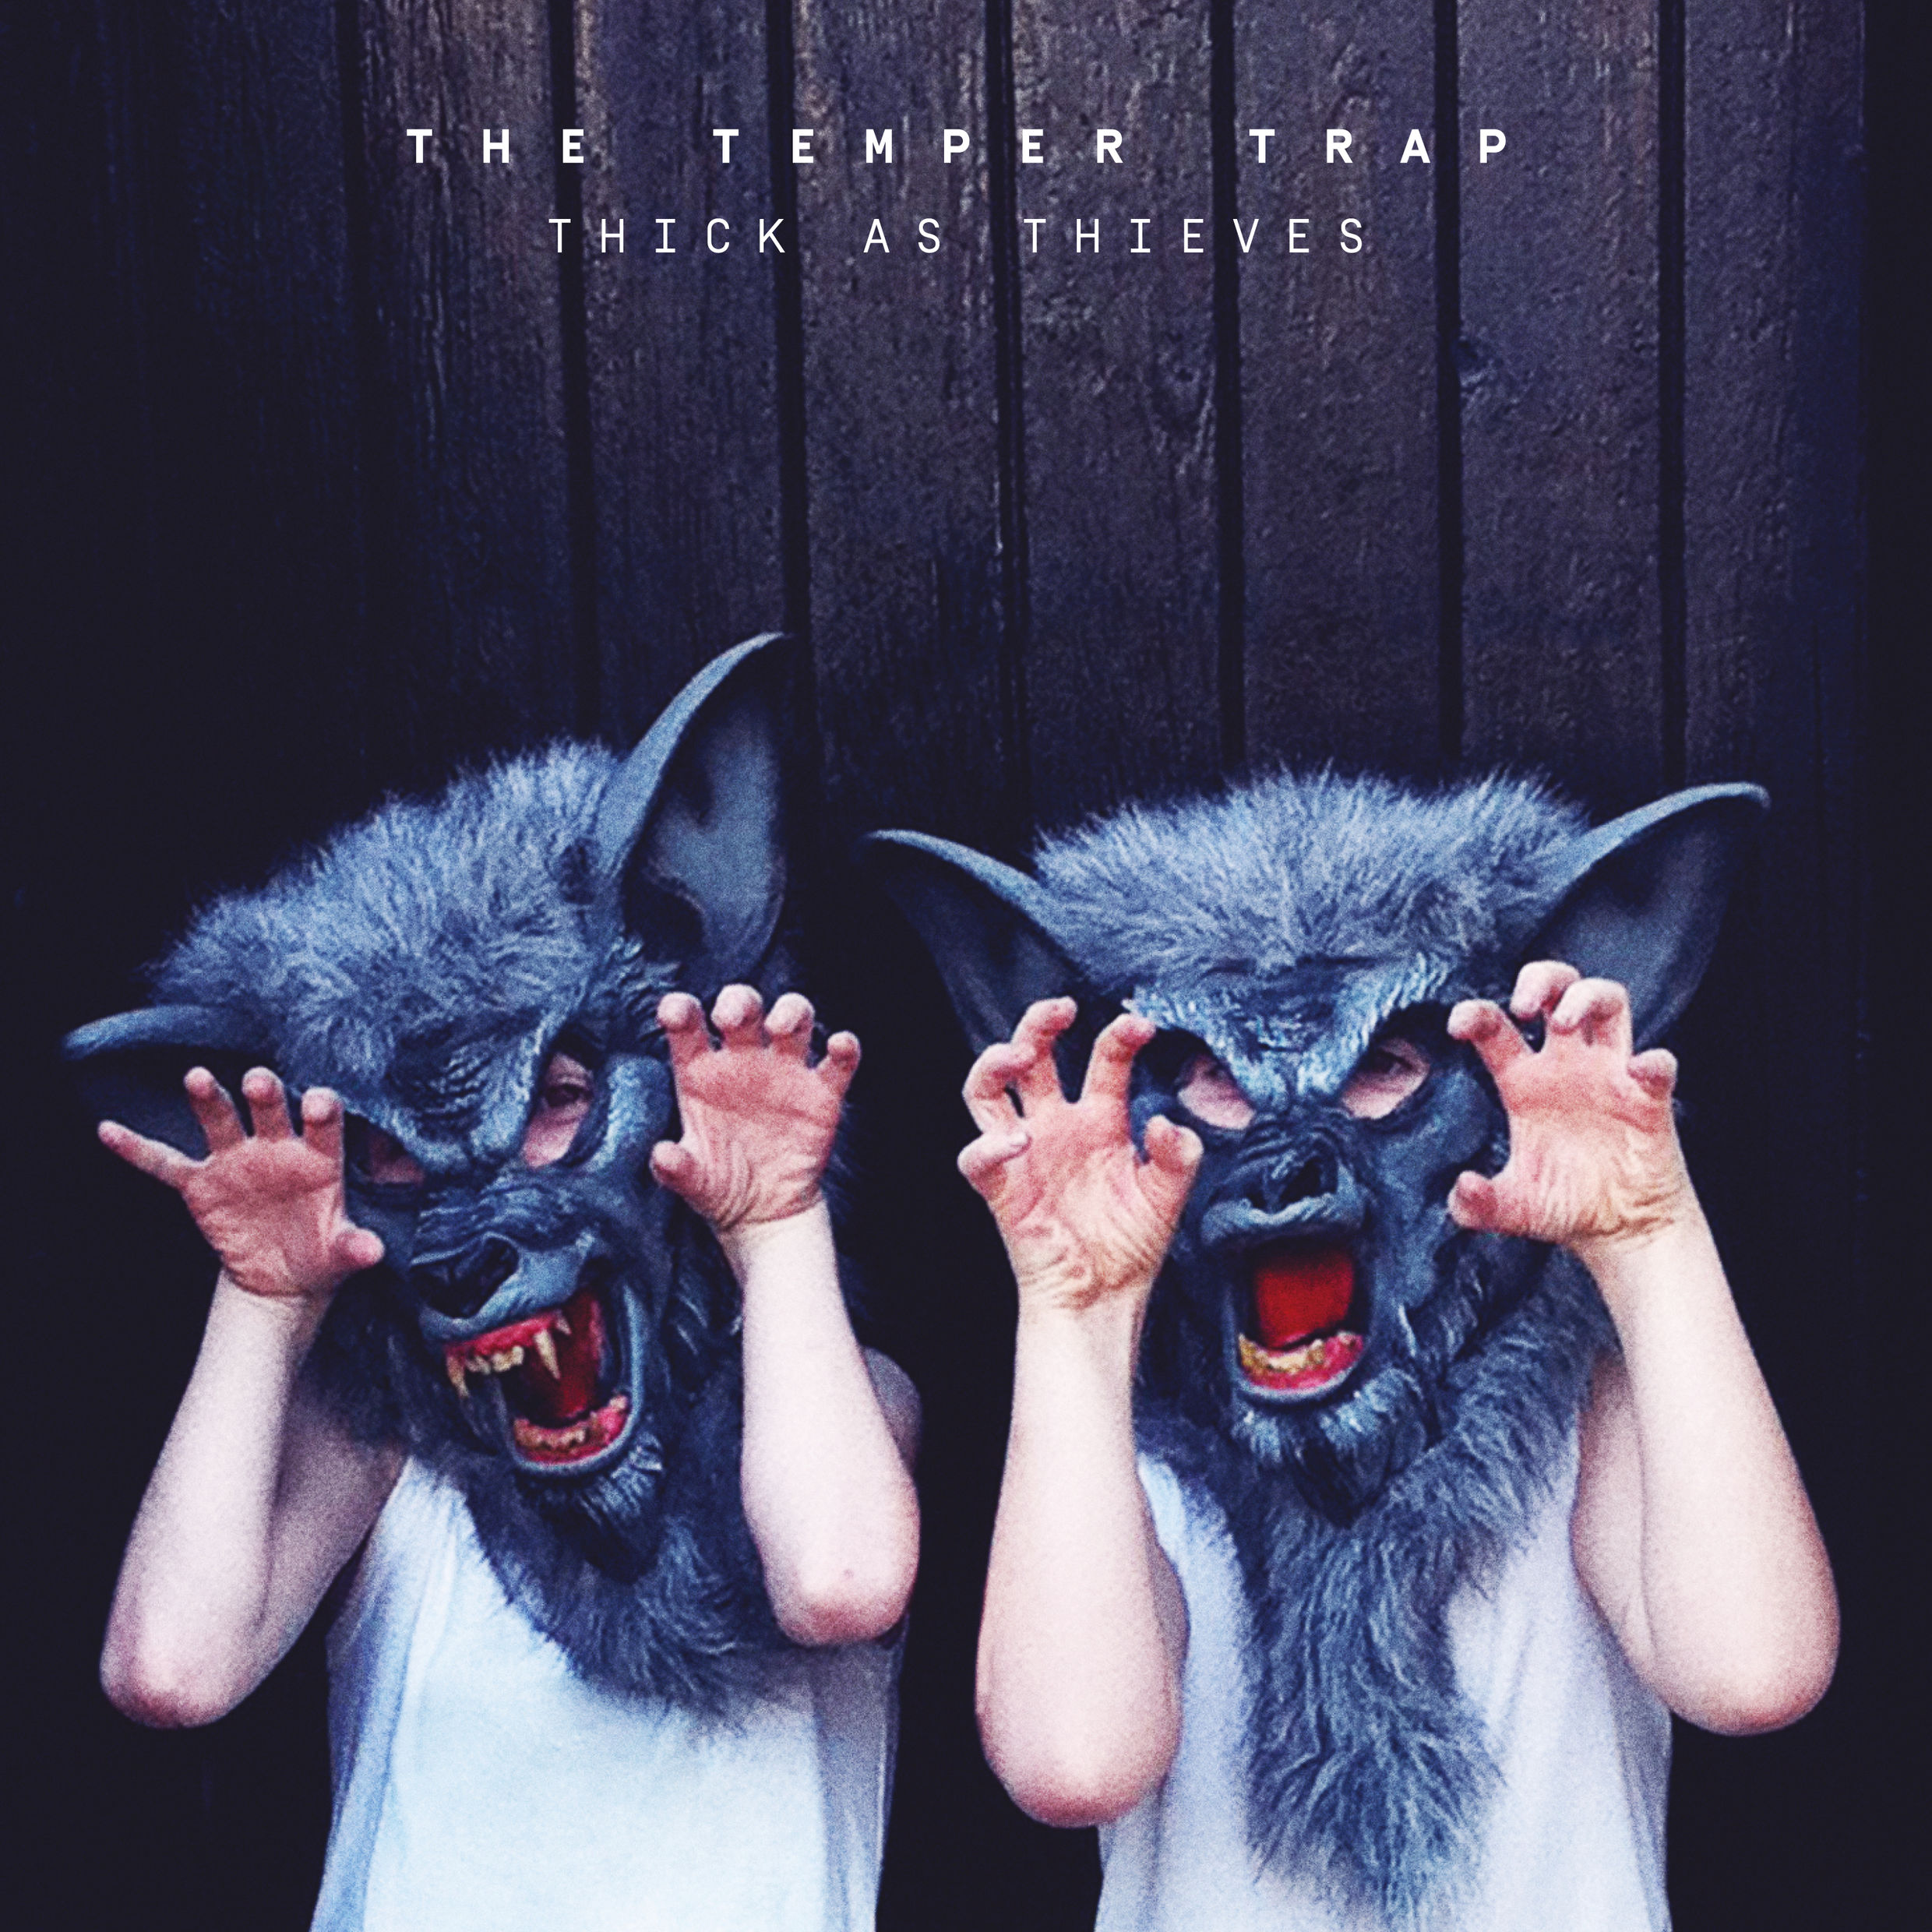 The-Temper-Trap-Thick-As-Thieves-2016-2480x2480